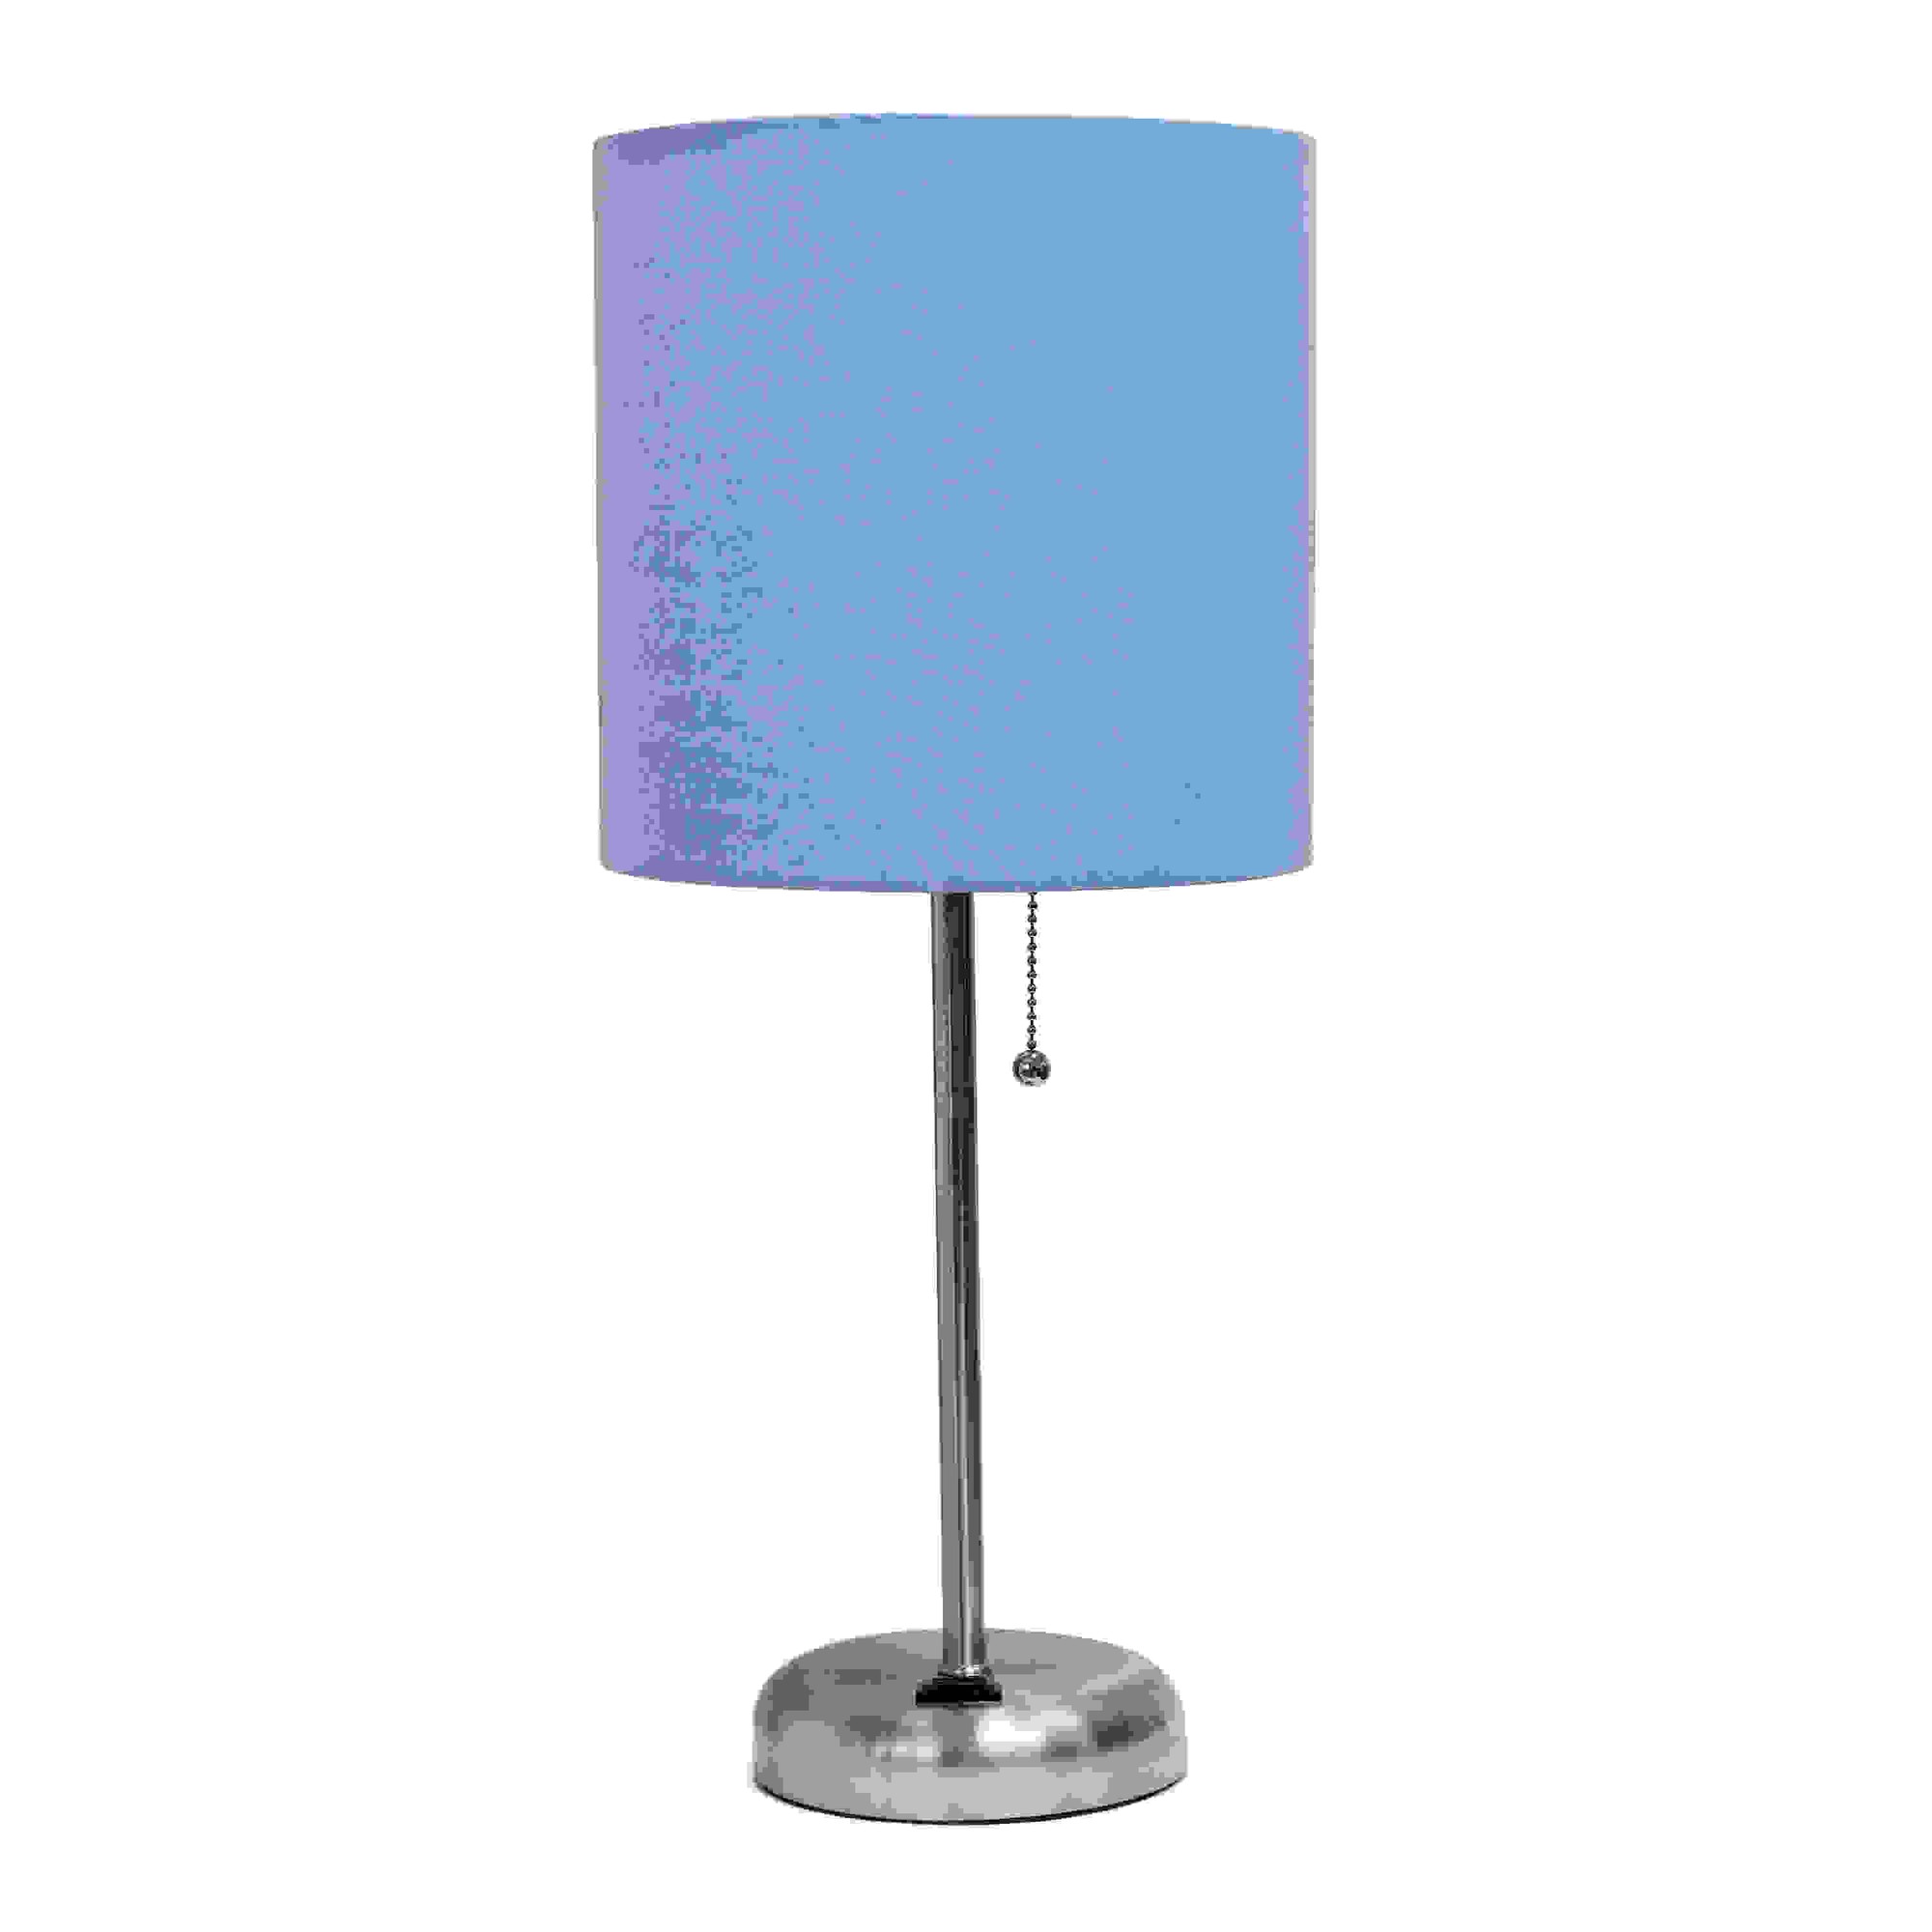 Simple Designs Stick Lamp with Charging Outlet and Fabric Shade, Blue